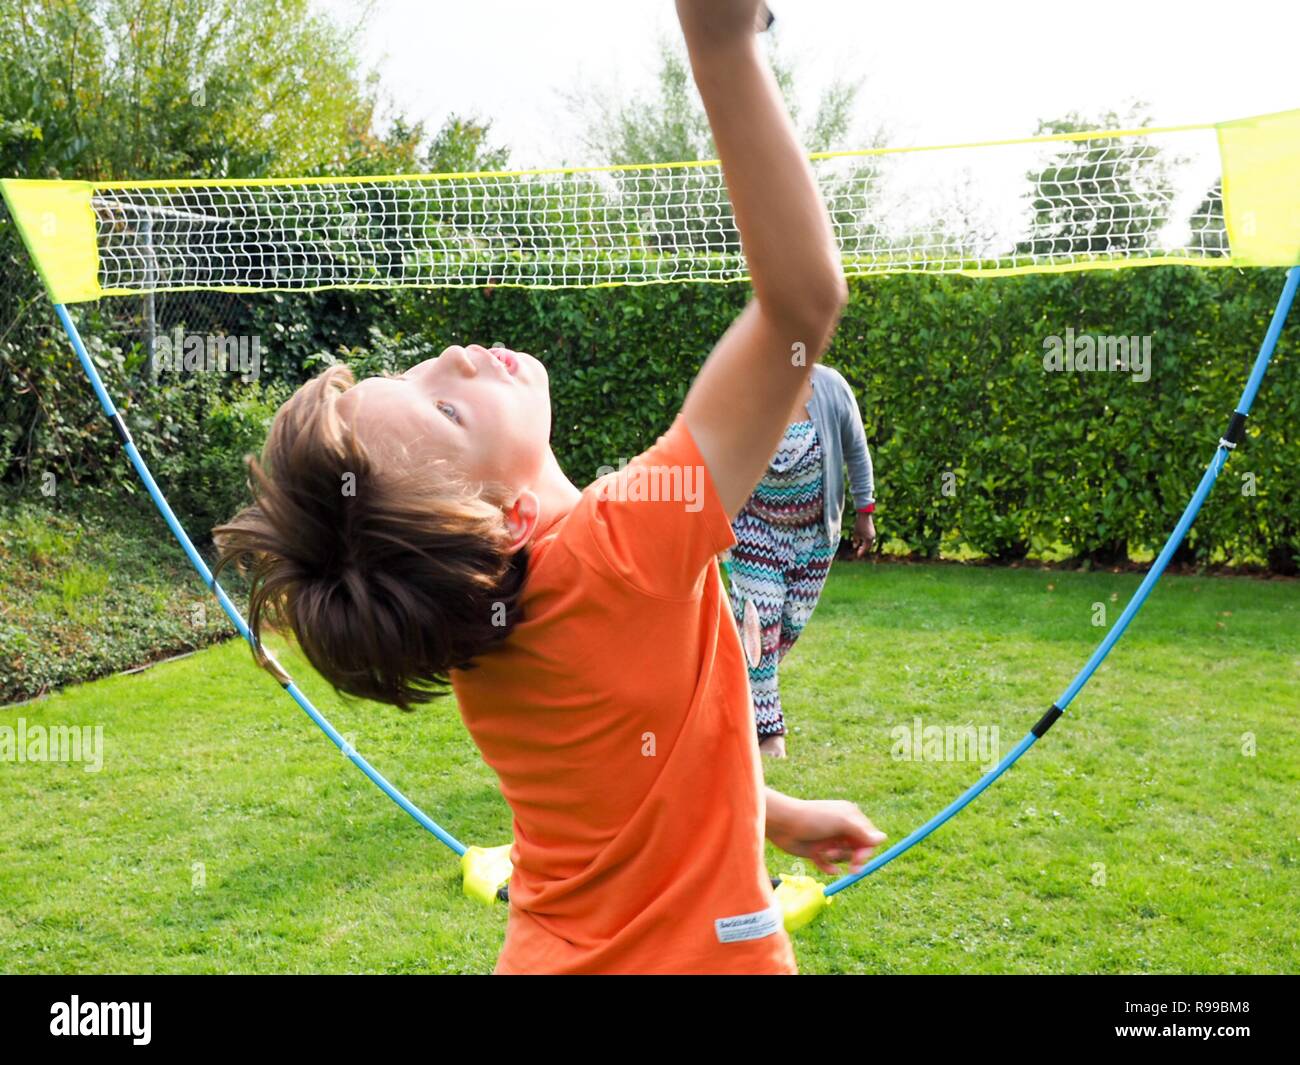 Young boy leaning backwards to hit a shuttle while playing badminton Stock Photo